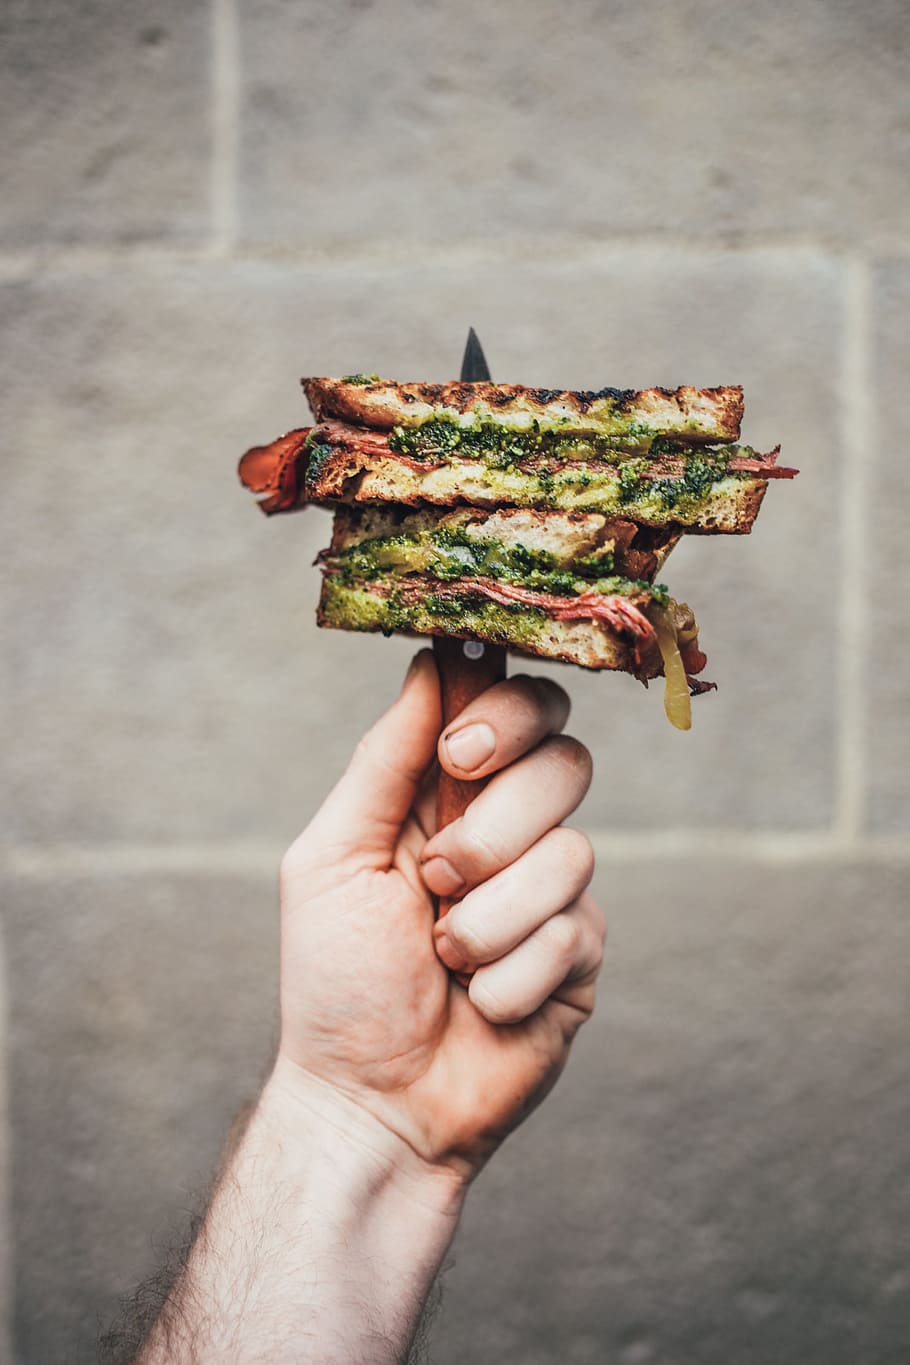 Gourmet pesto sandwich held with knife in a hand, barbecue, bread